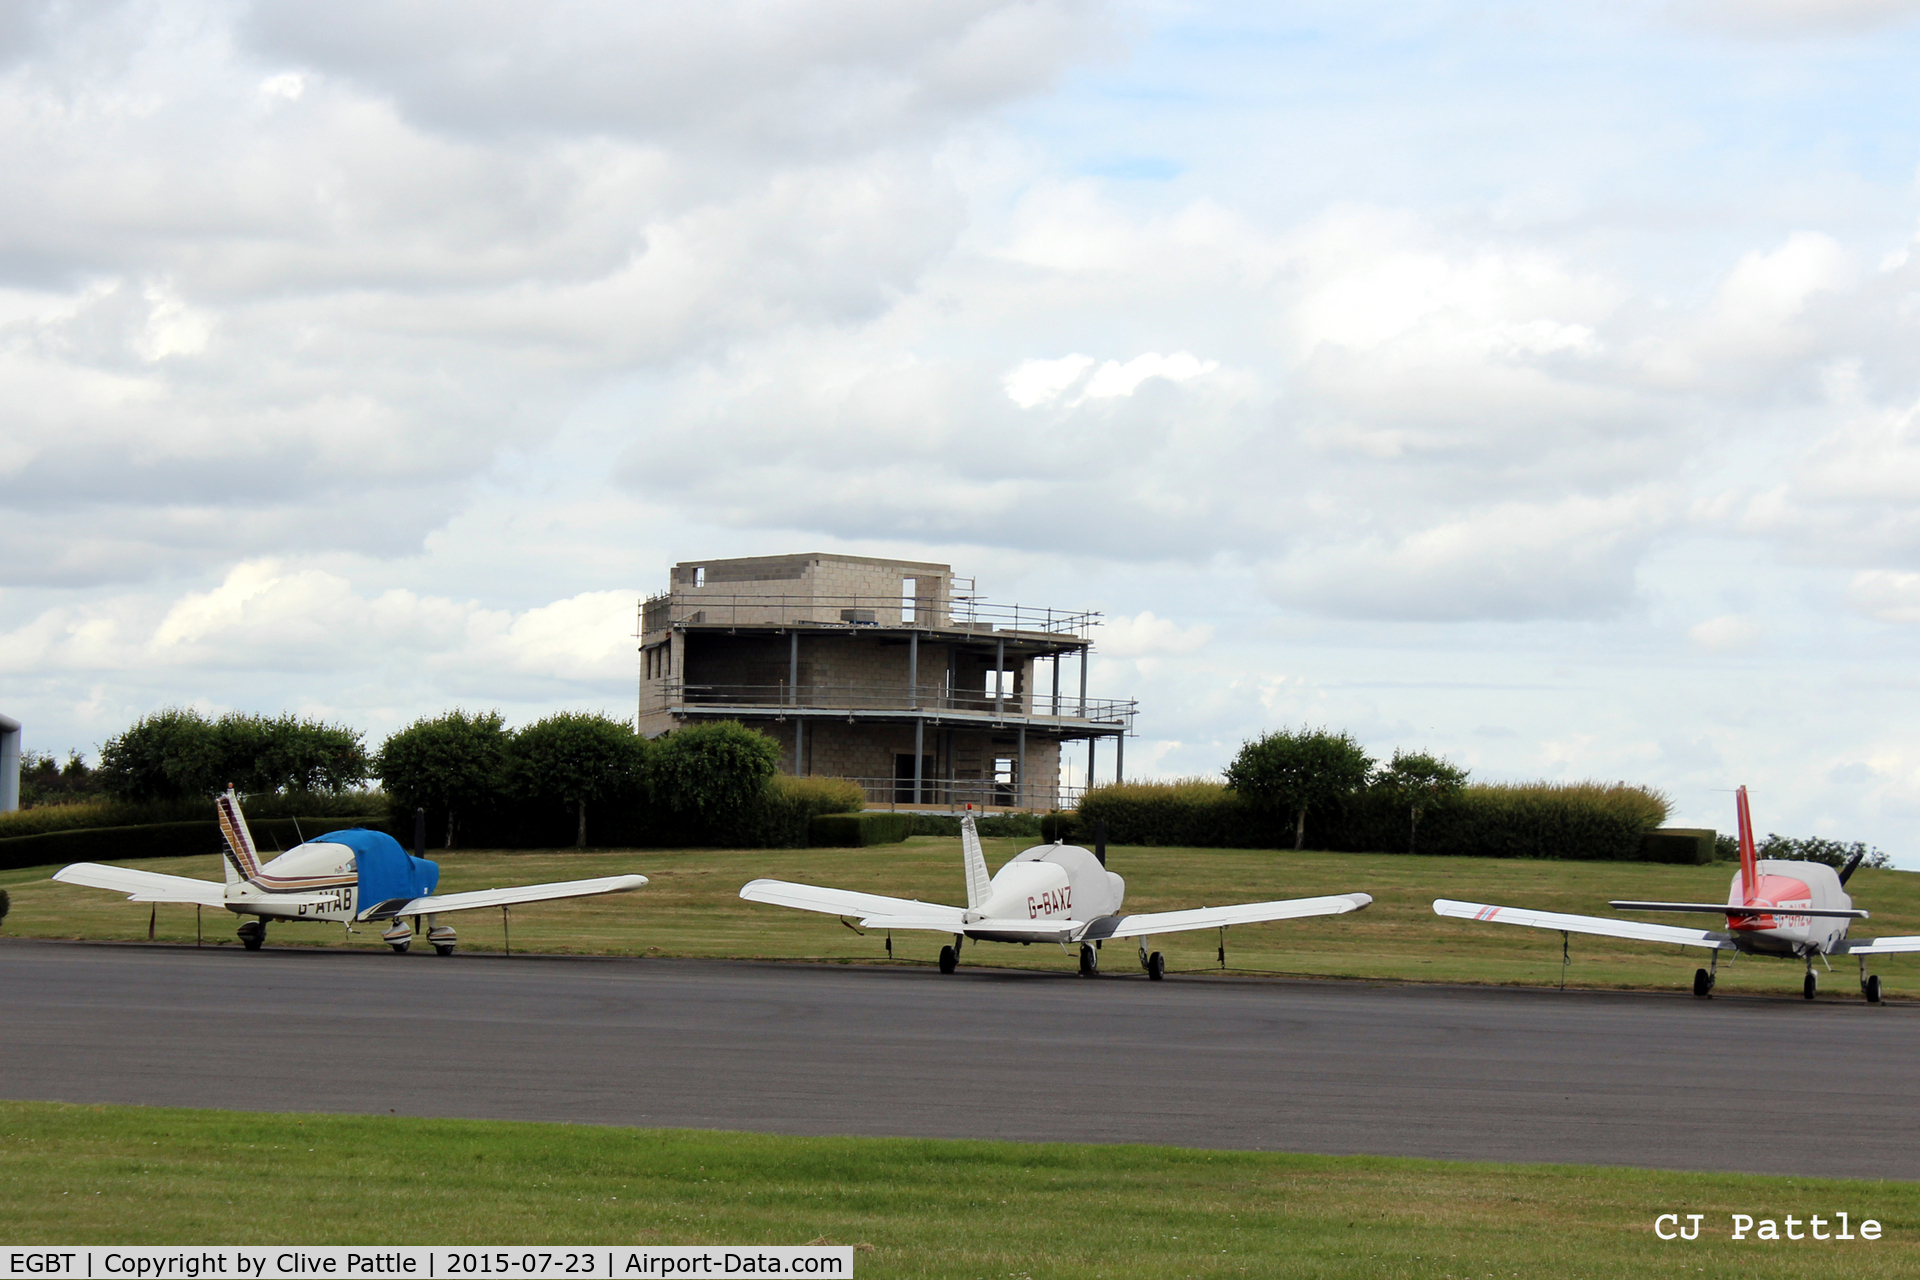 Turweston Aerodrome Airport, Turweston, England United Kingdom (EGBT) - A view of the new ATC Tower being constructed at Turweston EGBT